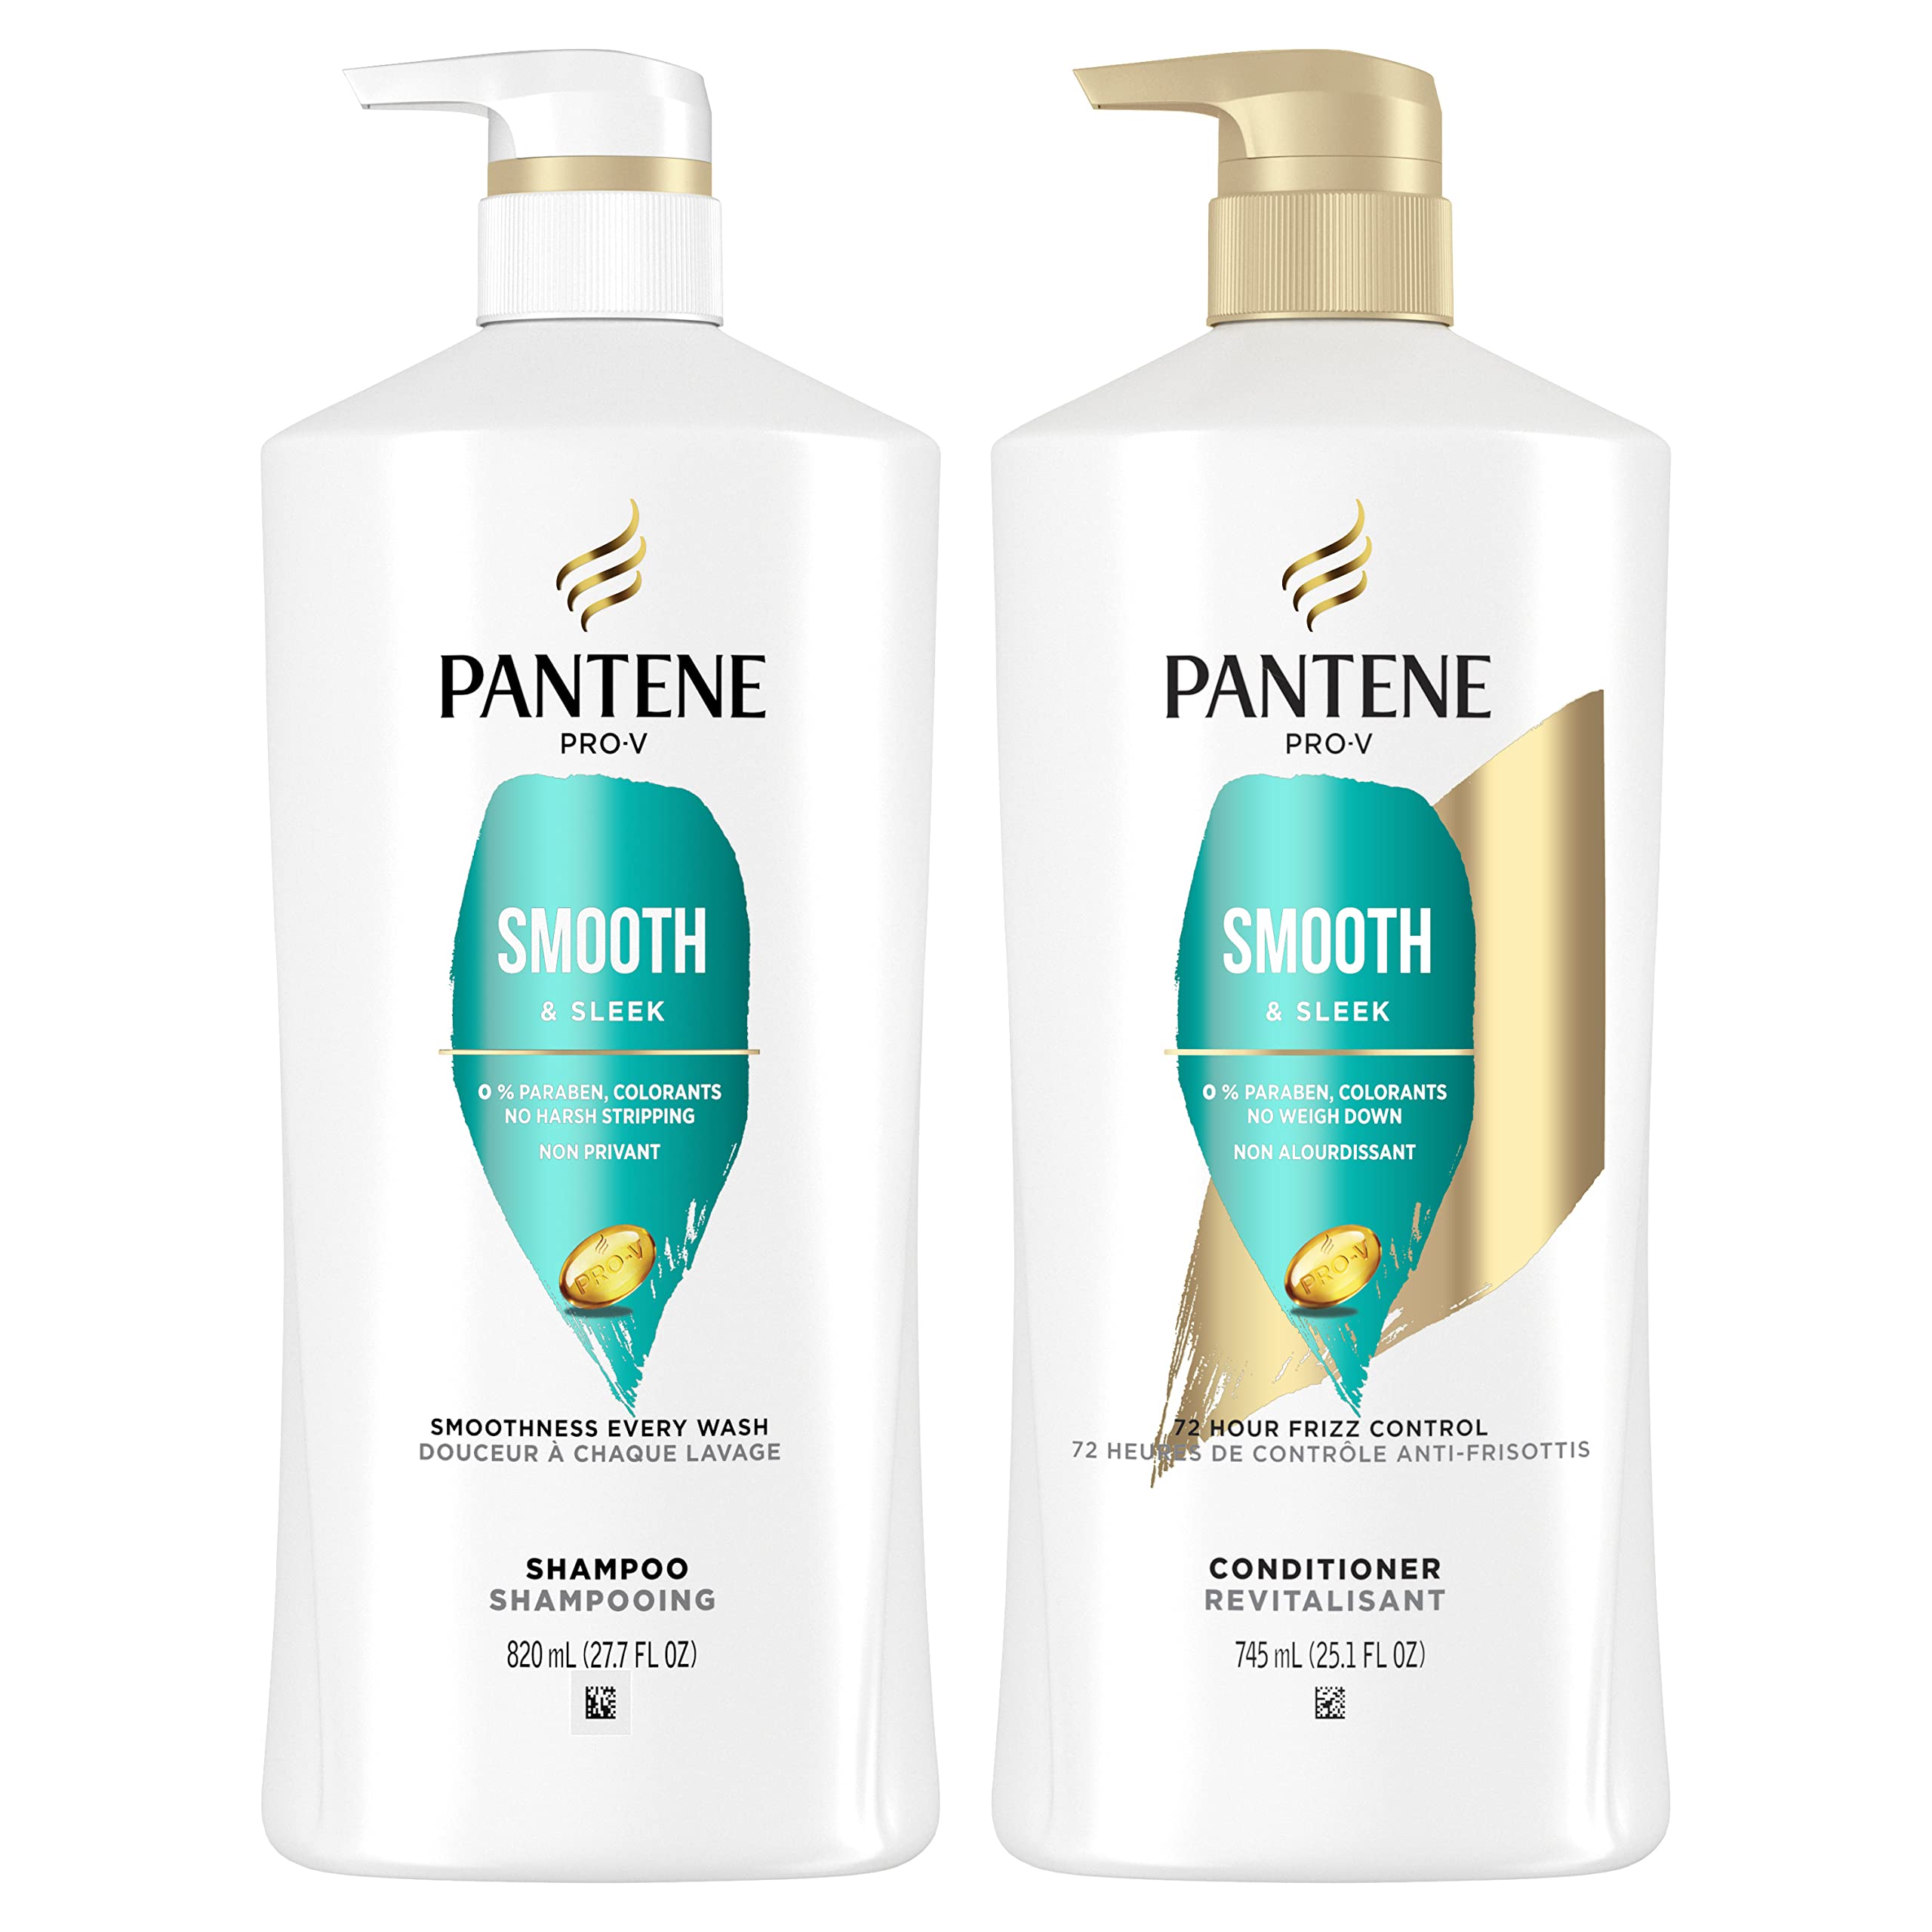 Pantene Shampoo, Conditioner and Hair Treatment Set, Smooth and Sleek for Frizz Control, Safe for Color-Treated Hair